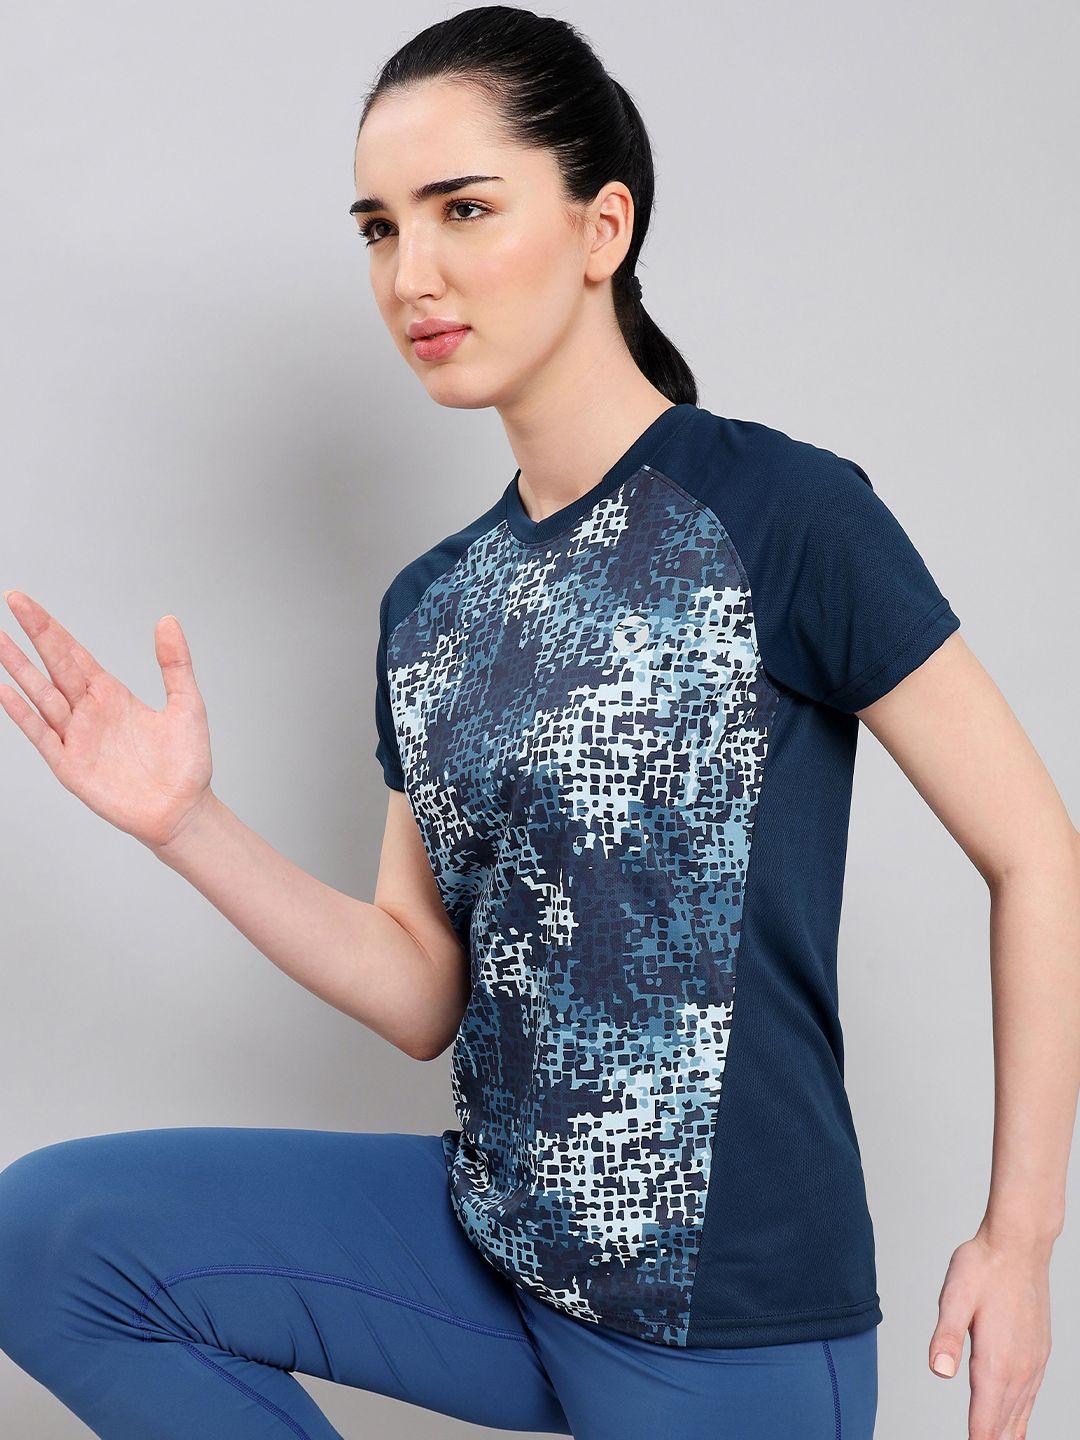 technosport antimicrobial abstract printed round neck slim fit t-shirts